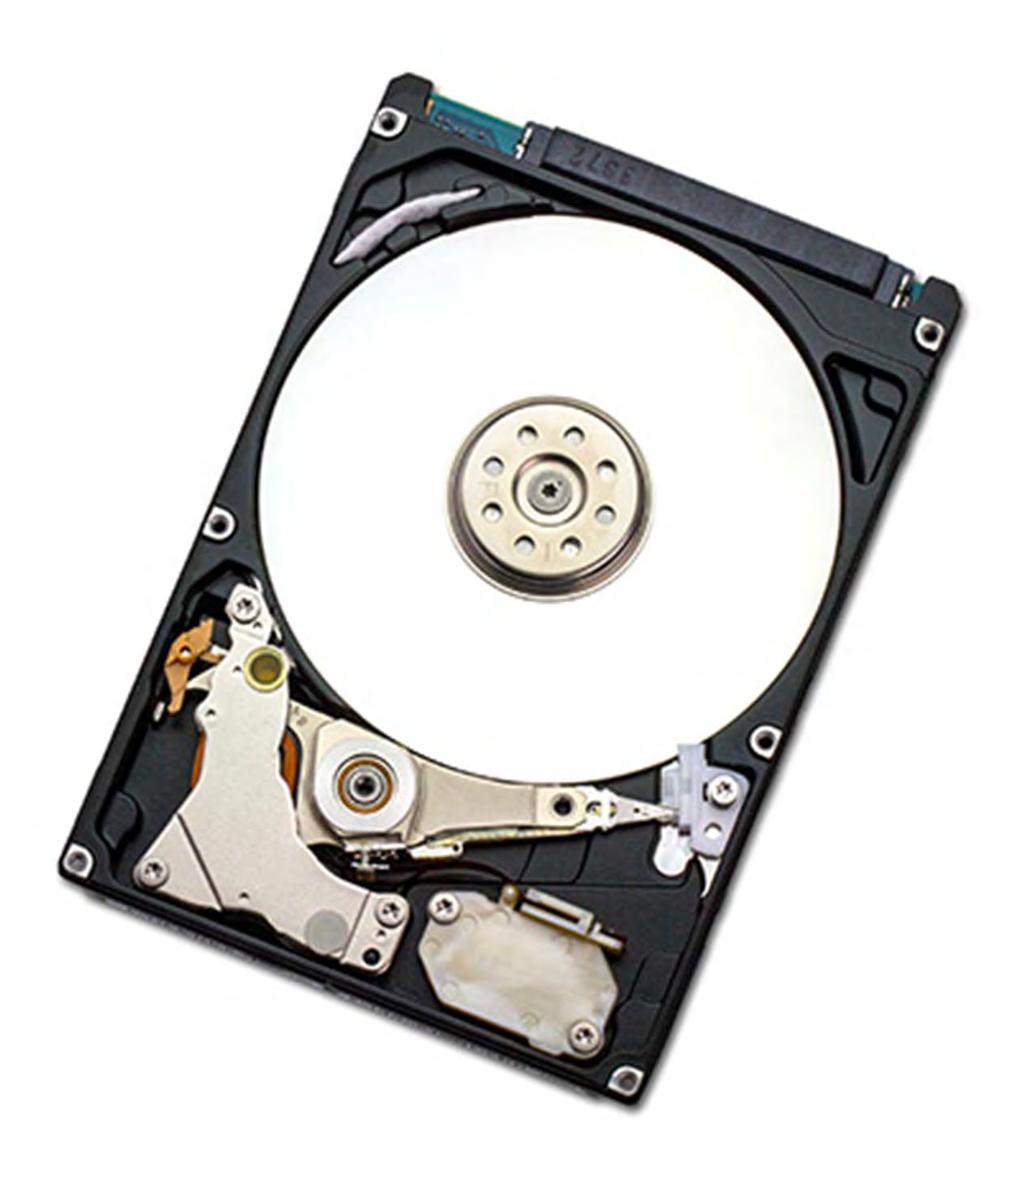 Hard Disk Drives Currently shipping up to 14 TB with 20 + TB expected by 2019, 40 + TB by next decade Current HDD areal densities exceed 1 Gb per square inch He filled HDDs provide greater energy